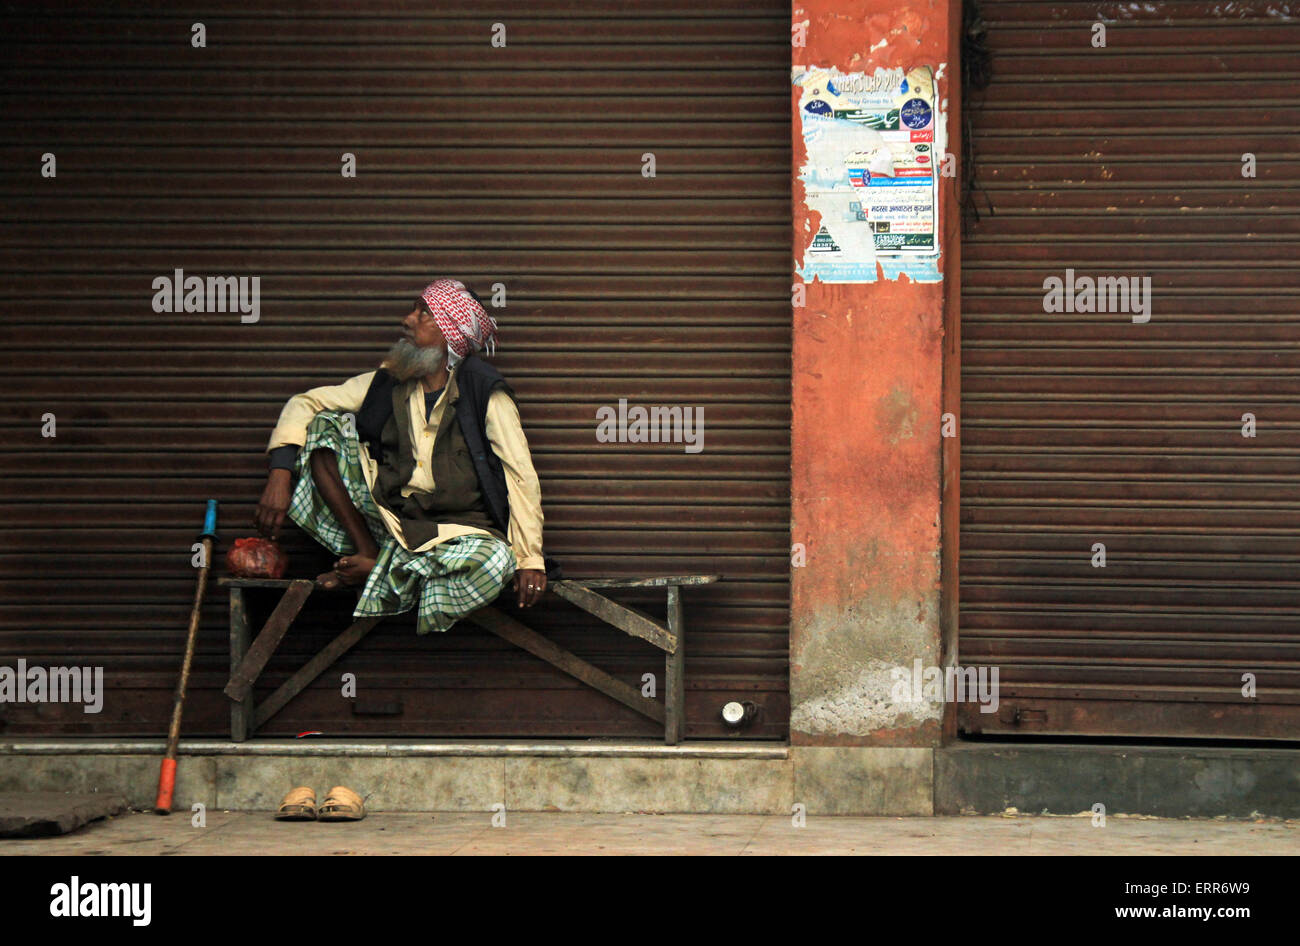 Old Indian Man Sitting on a Bench, Looking Sideways, Agra, India Stock Photo